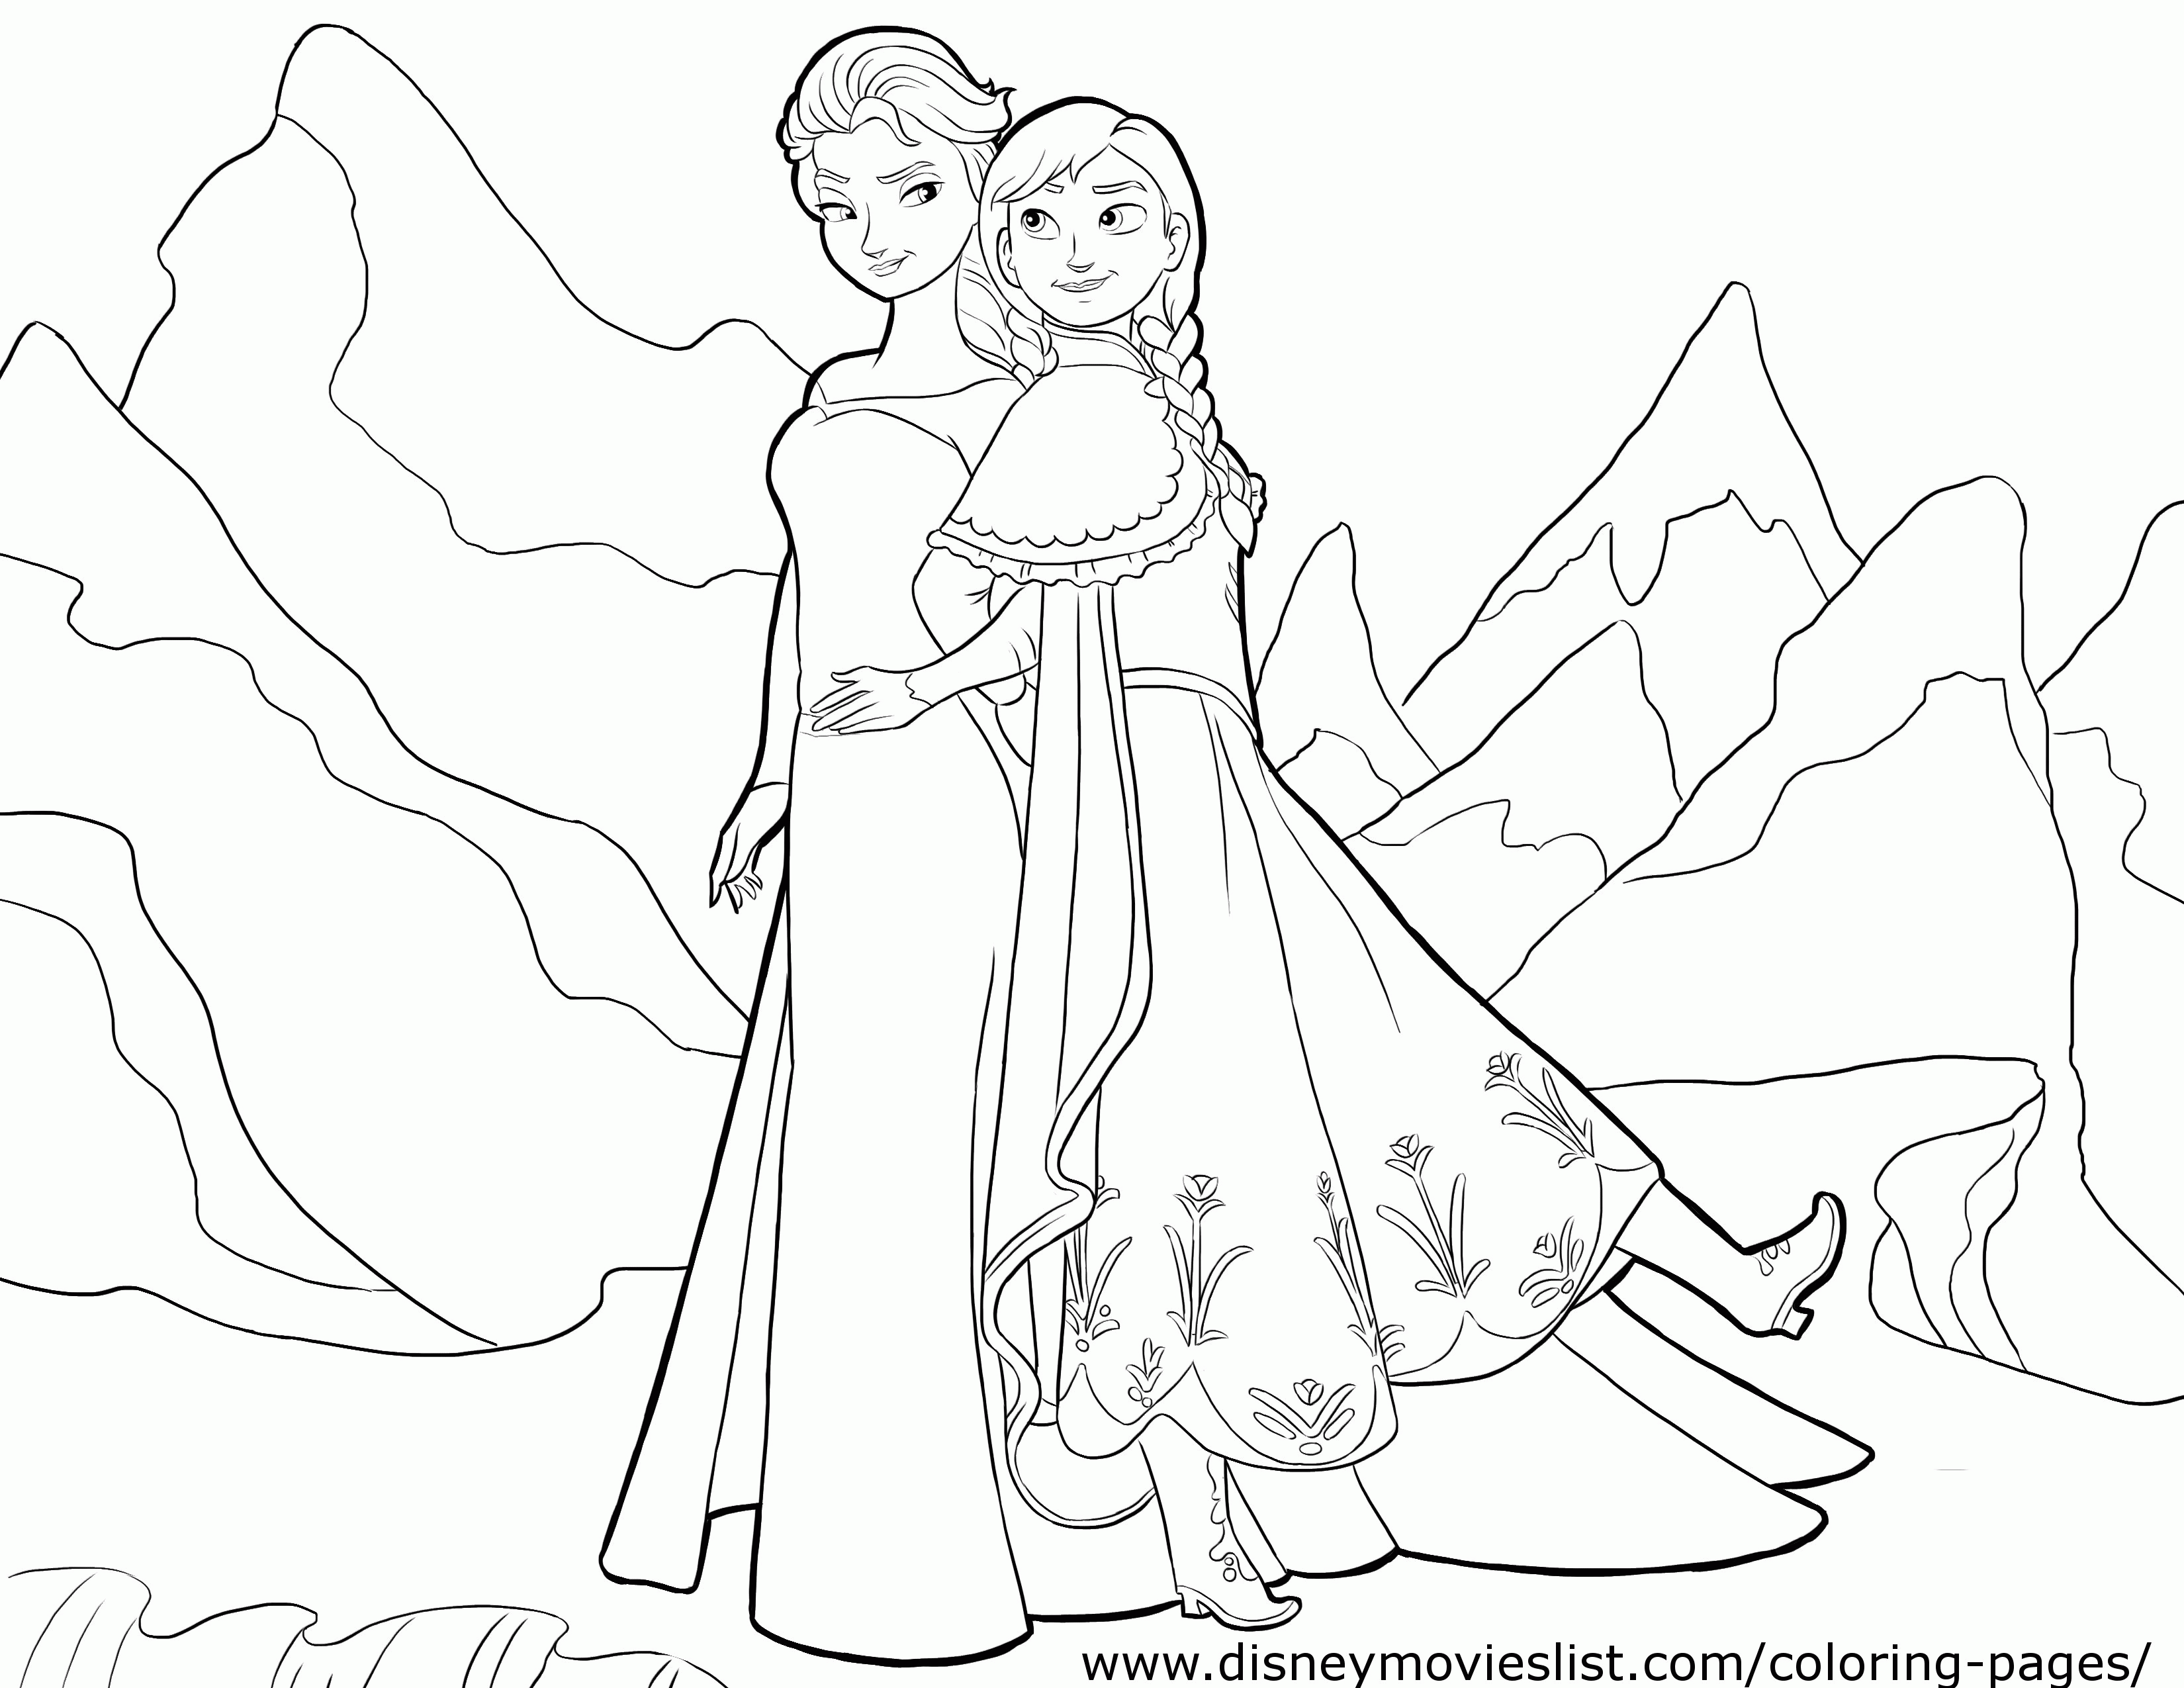 Anna and Elsa Together - Disney's Frozen Coloring Pages Sheet, Free Disney Printable Frozen